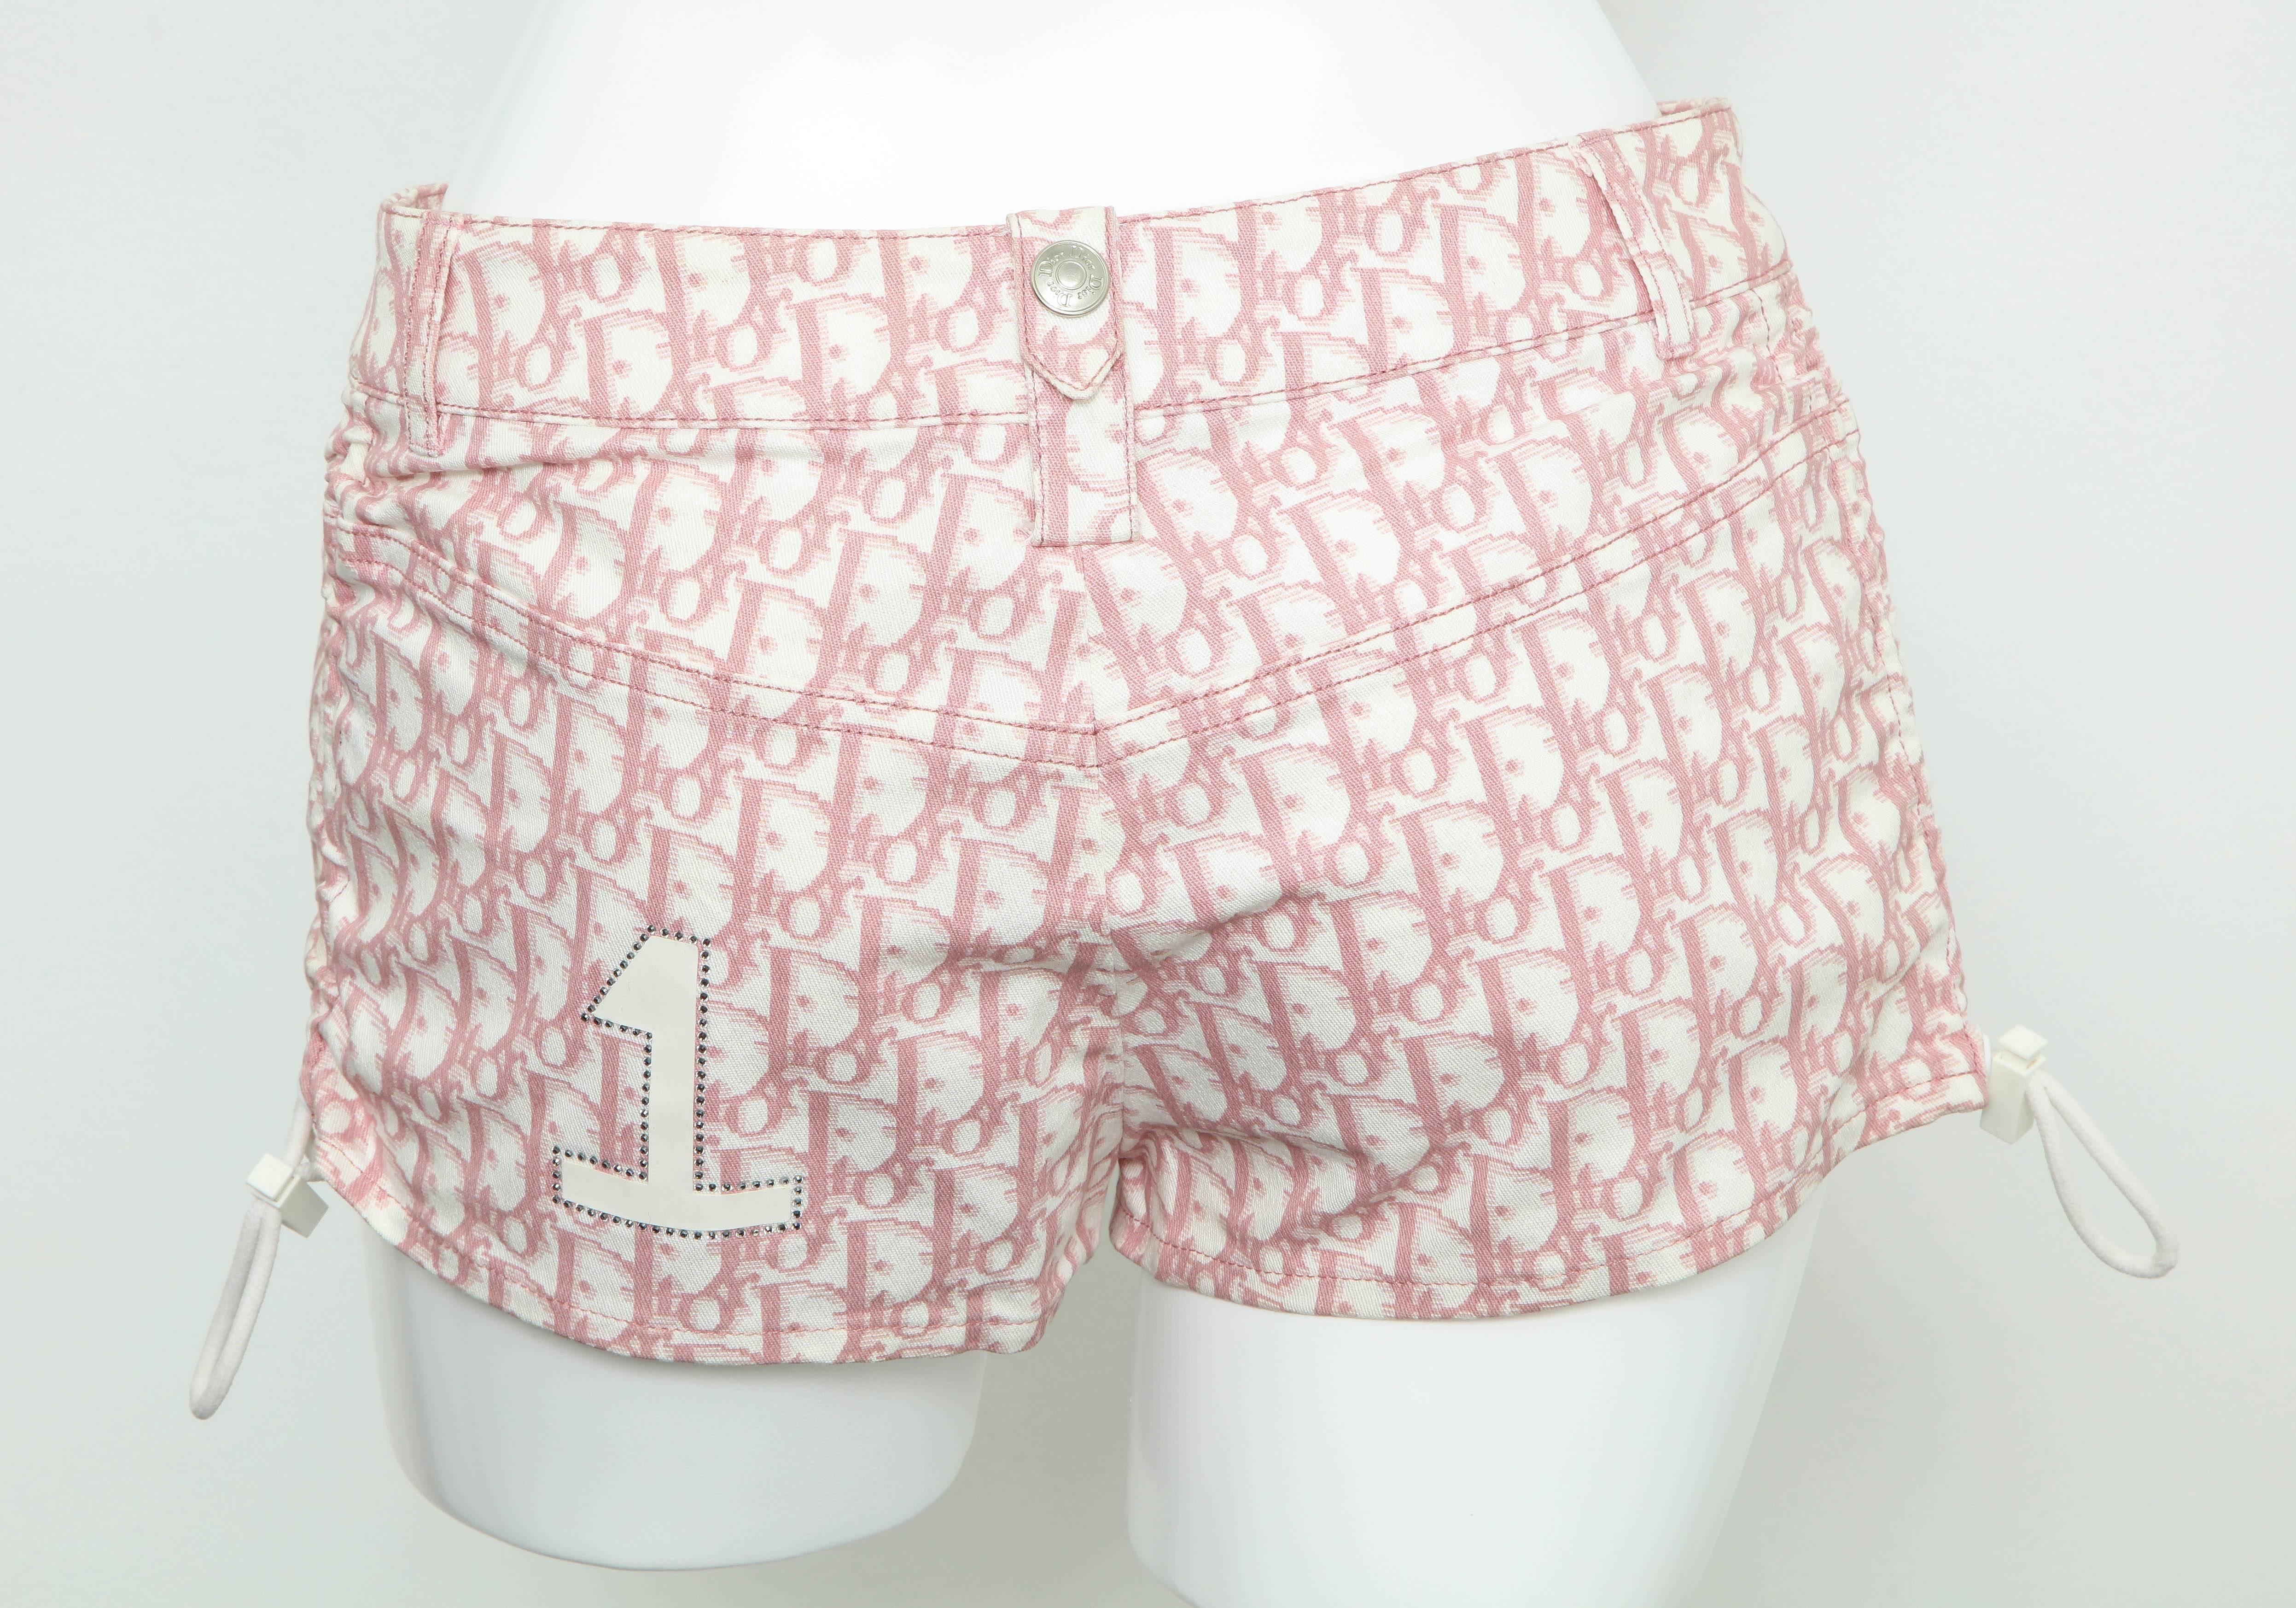 John Galliano for Christian Dior Pink Trotter Logo shorts In Excellent Condition For Sale In Chicago, IL